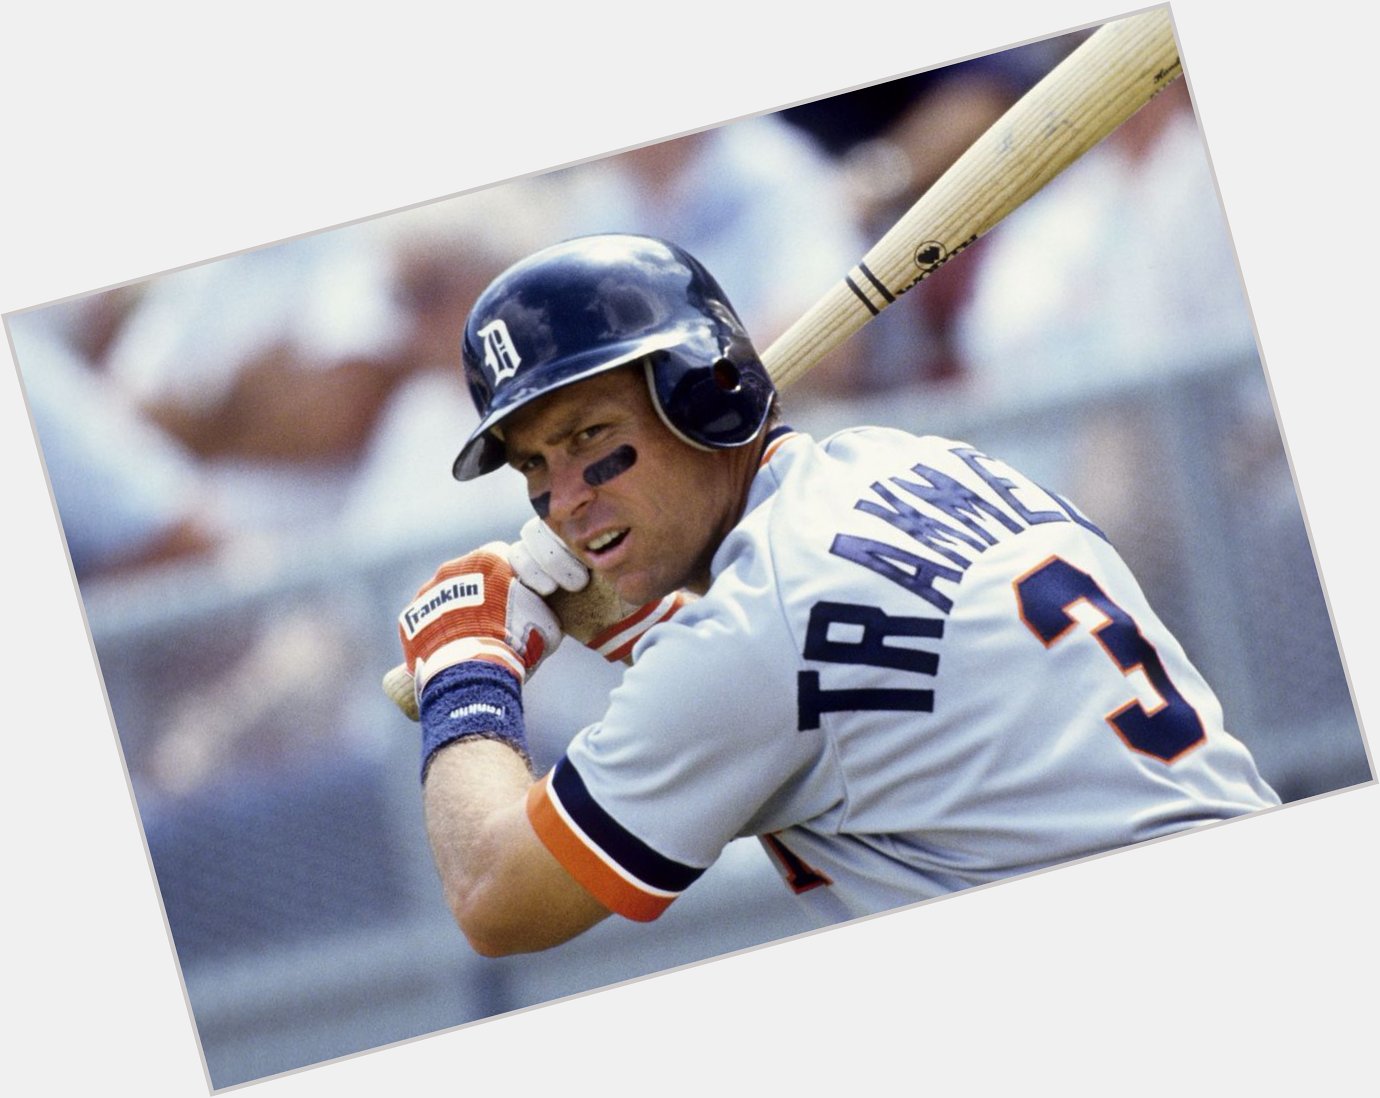 Happy Birthday to Alan Trammell, who turns 59 today! 